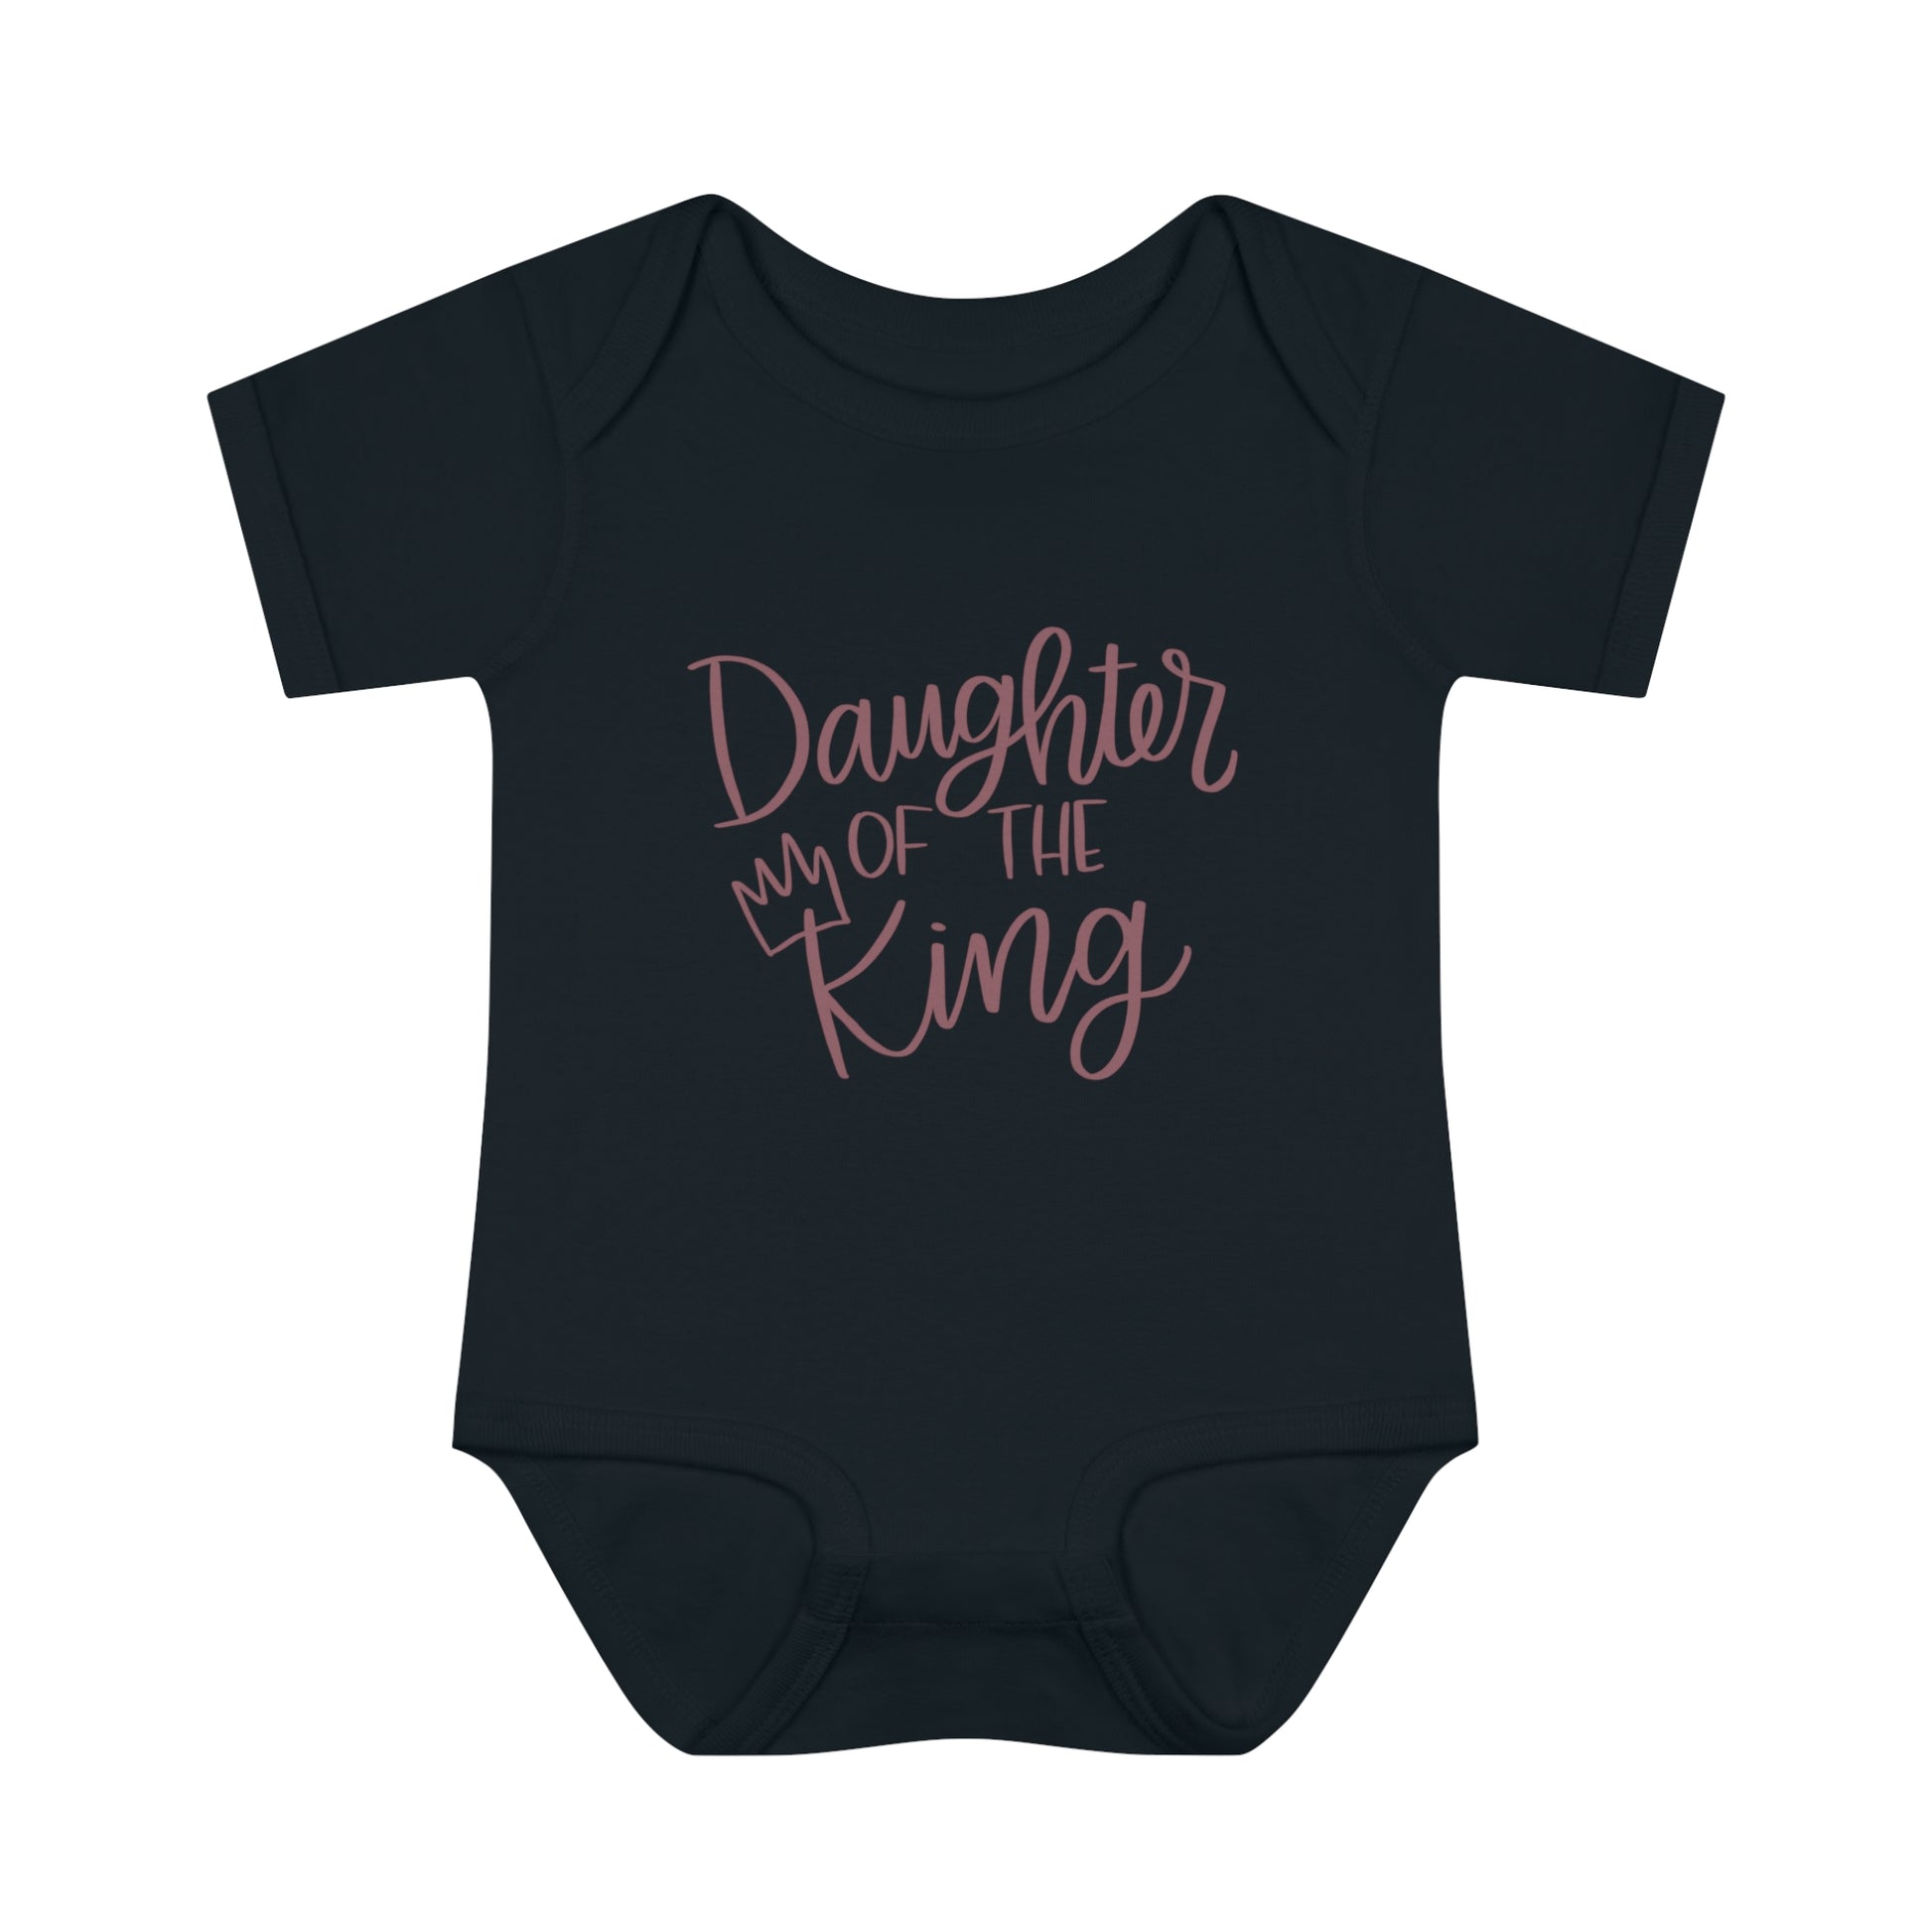 Daughter of the King Infant Body Suit - Friends of the Faith